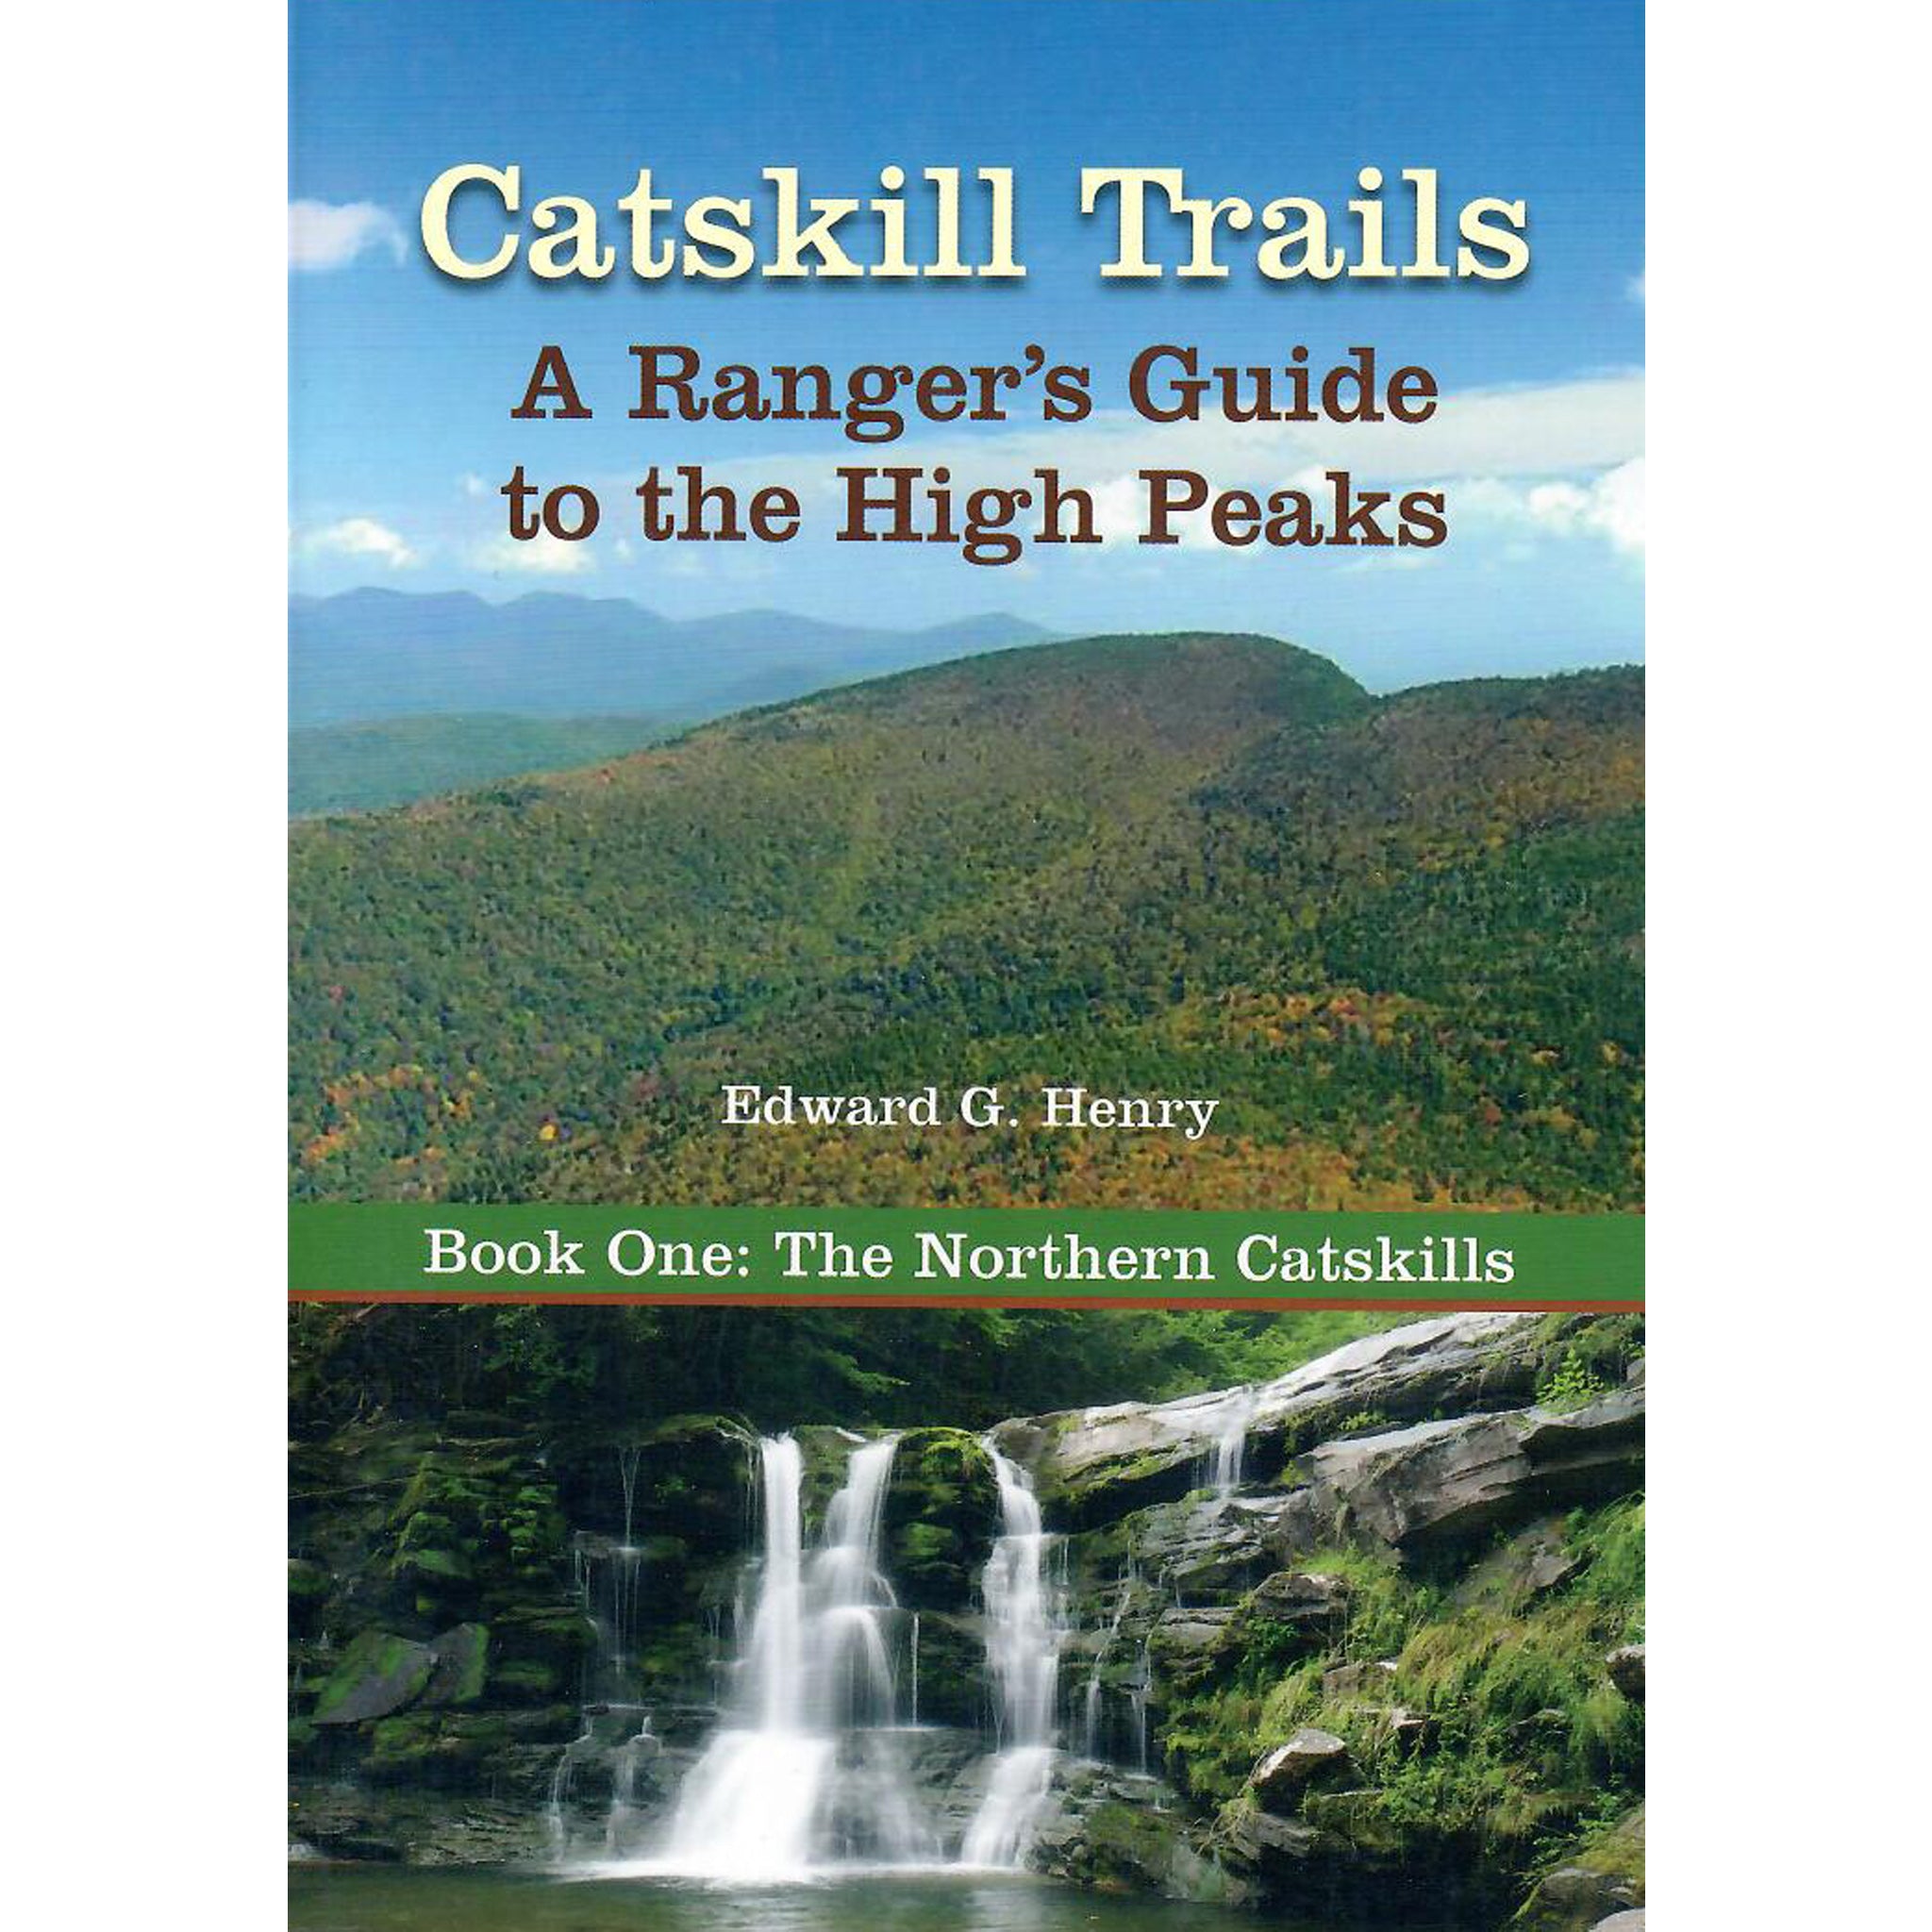 Catskill Trails: A Rangers Guide to the High Peaks